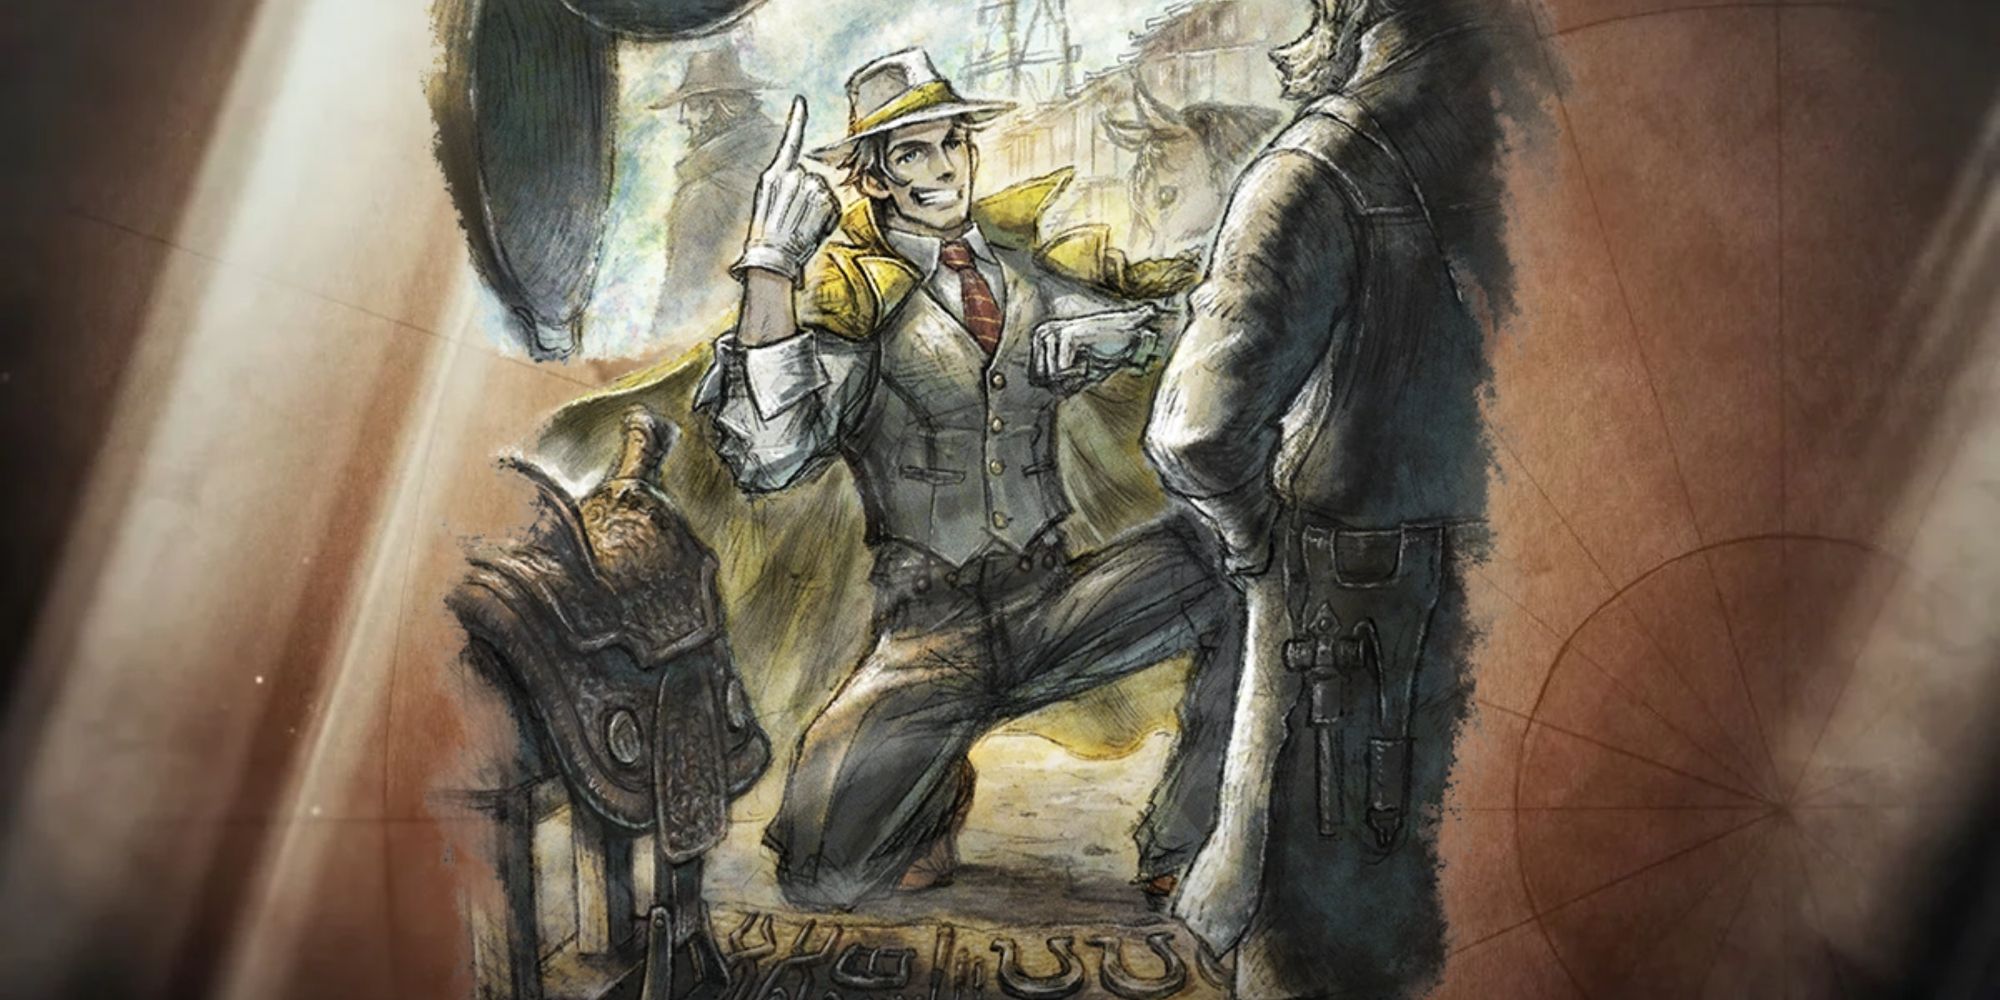 An image of Partitio, the Merchant in Octopath Traveler 2, using his Purchase Path Action to purchase unique items from townspeople.